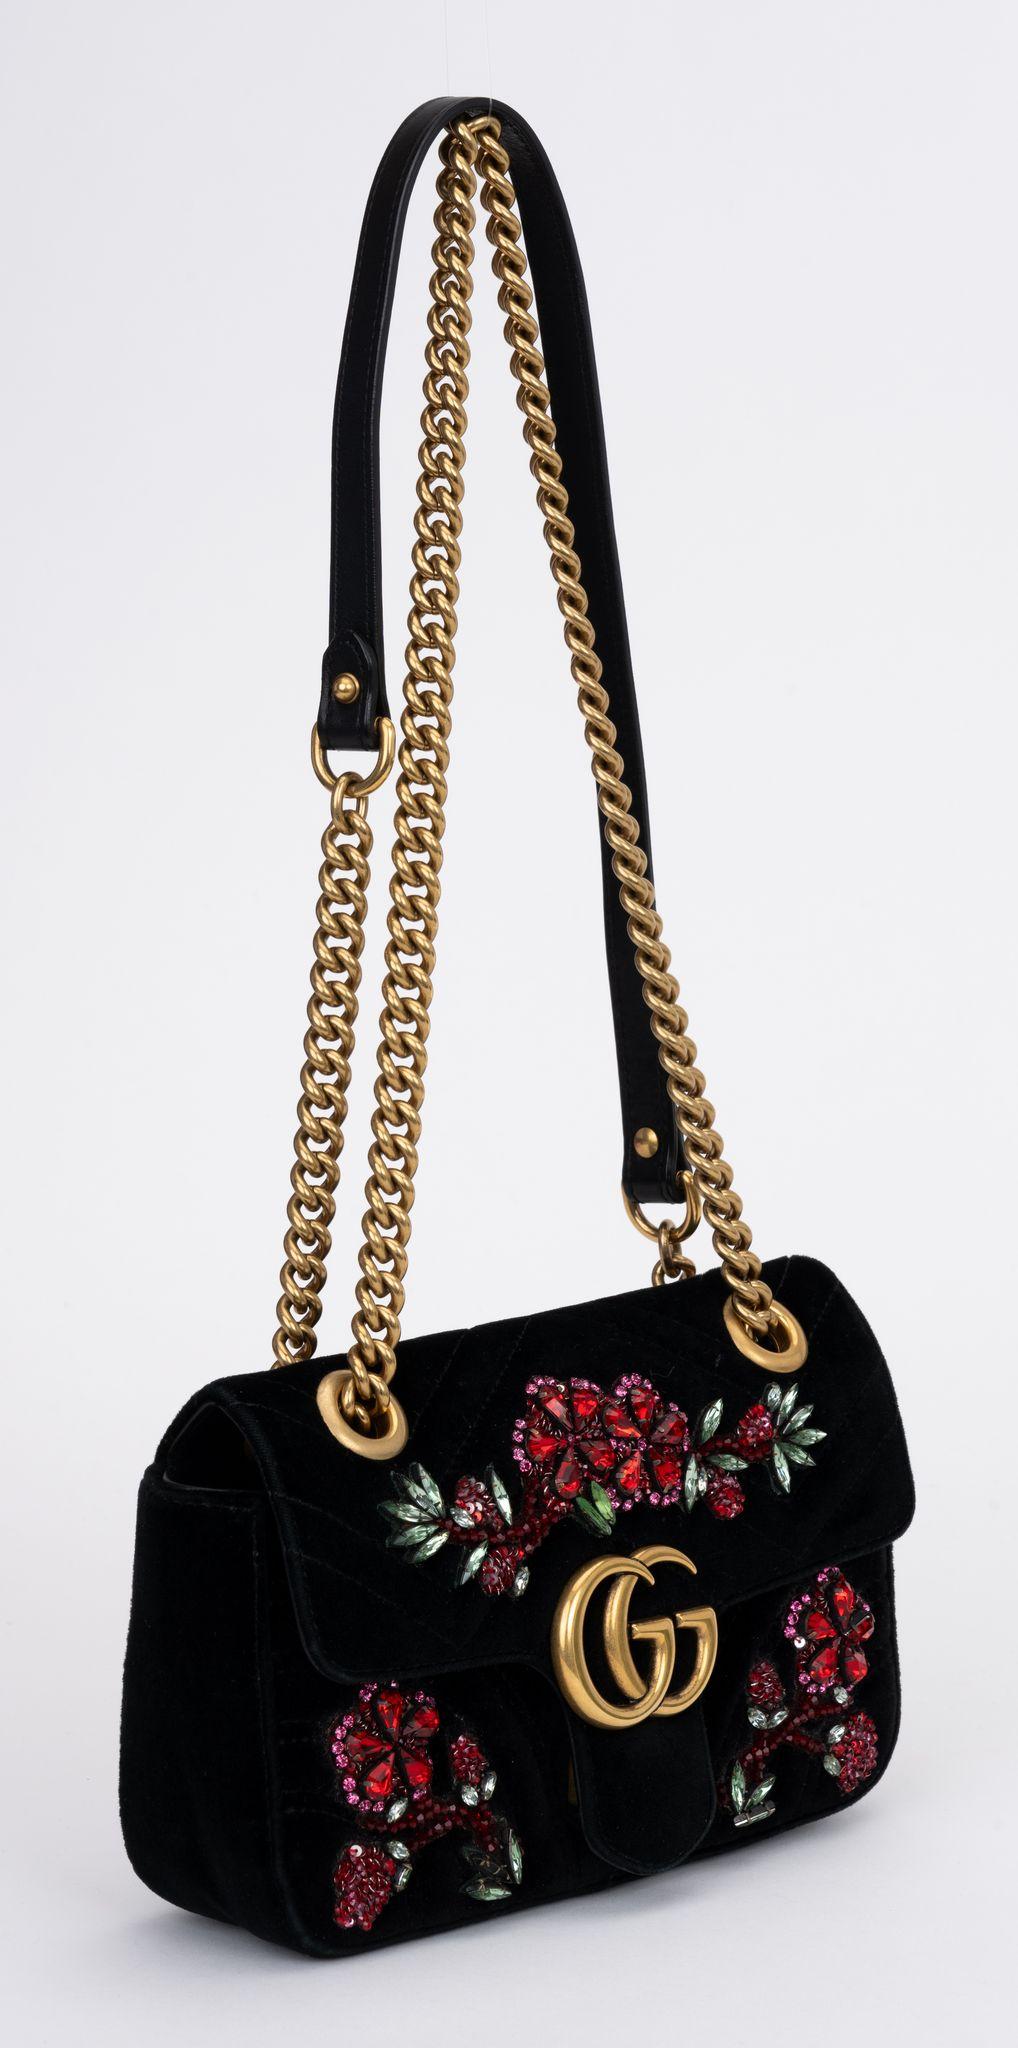 Gucci marmont preloved small, cross body or shoulder bag. Black velvet exterior with beaded embellishment representing flowers and leaves. Pink silk lining and antique gold hardware. 
Shoulder drop 12